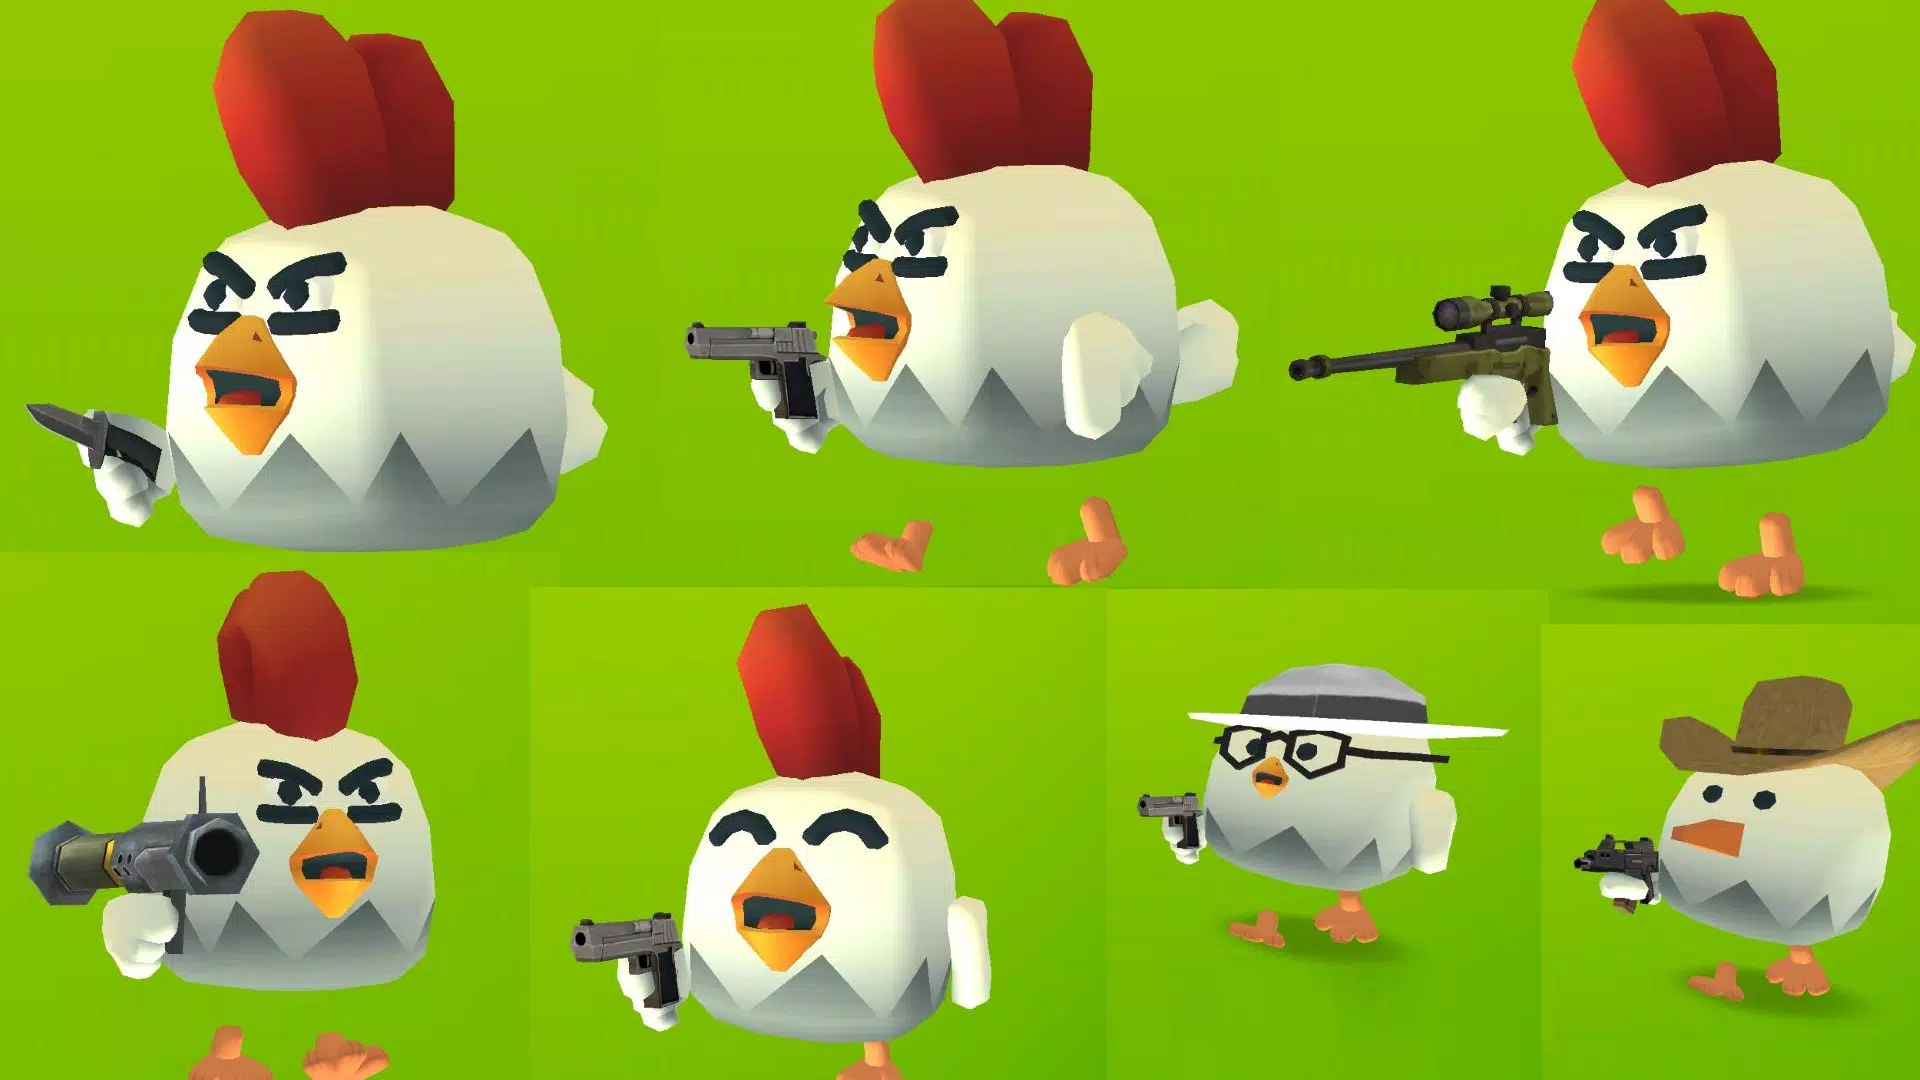 Chicken Gun Game for Android - Download